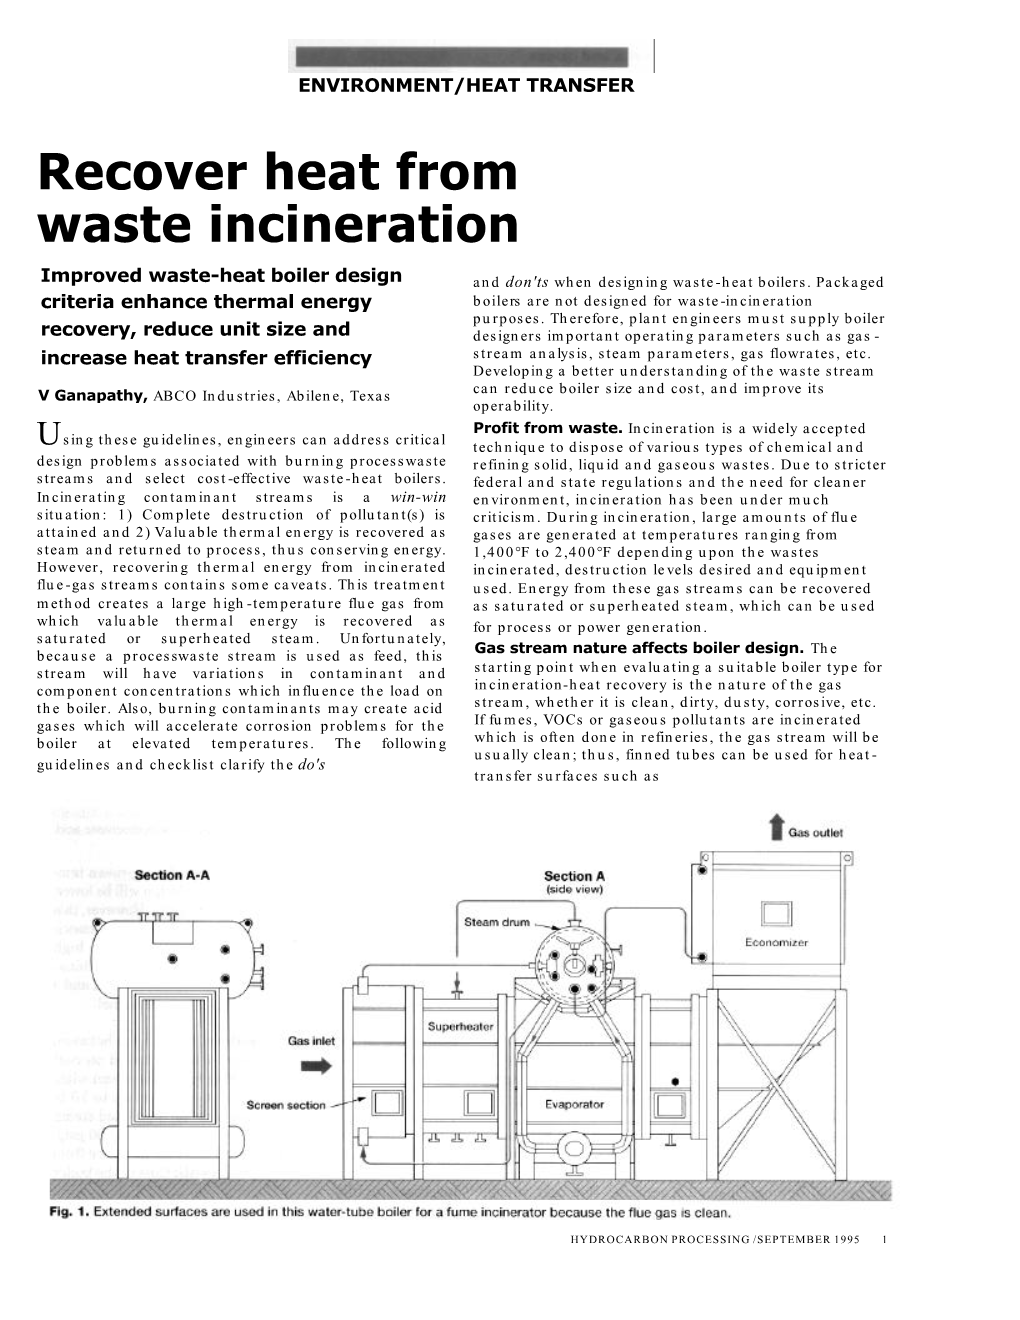 Recover Heat from Waste Incineration